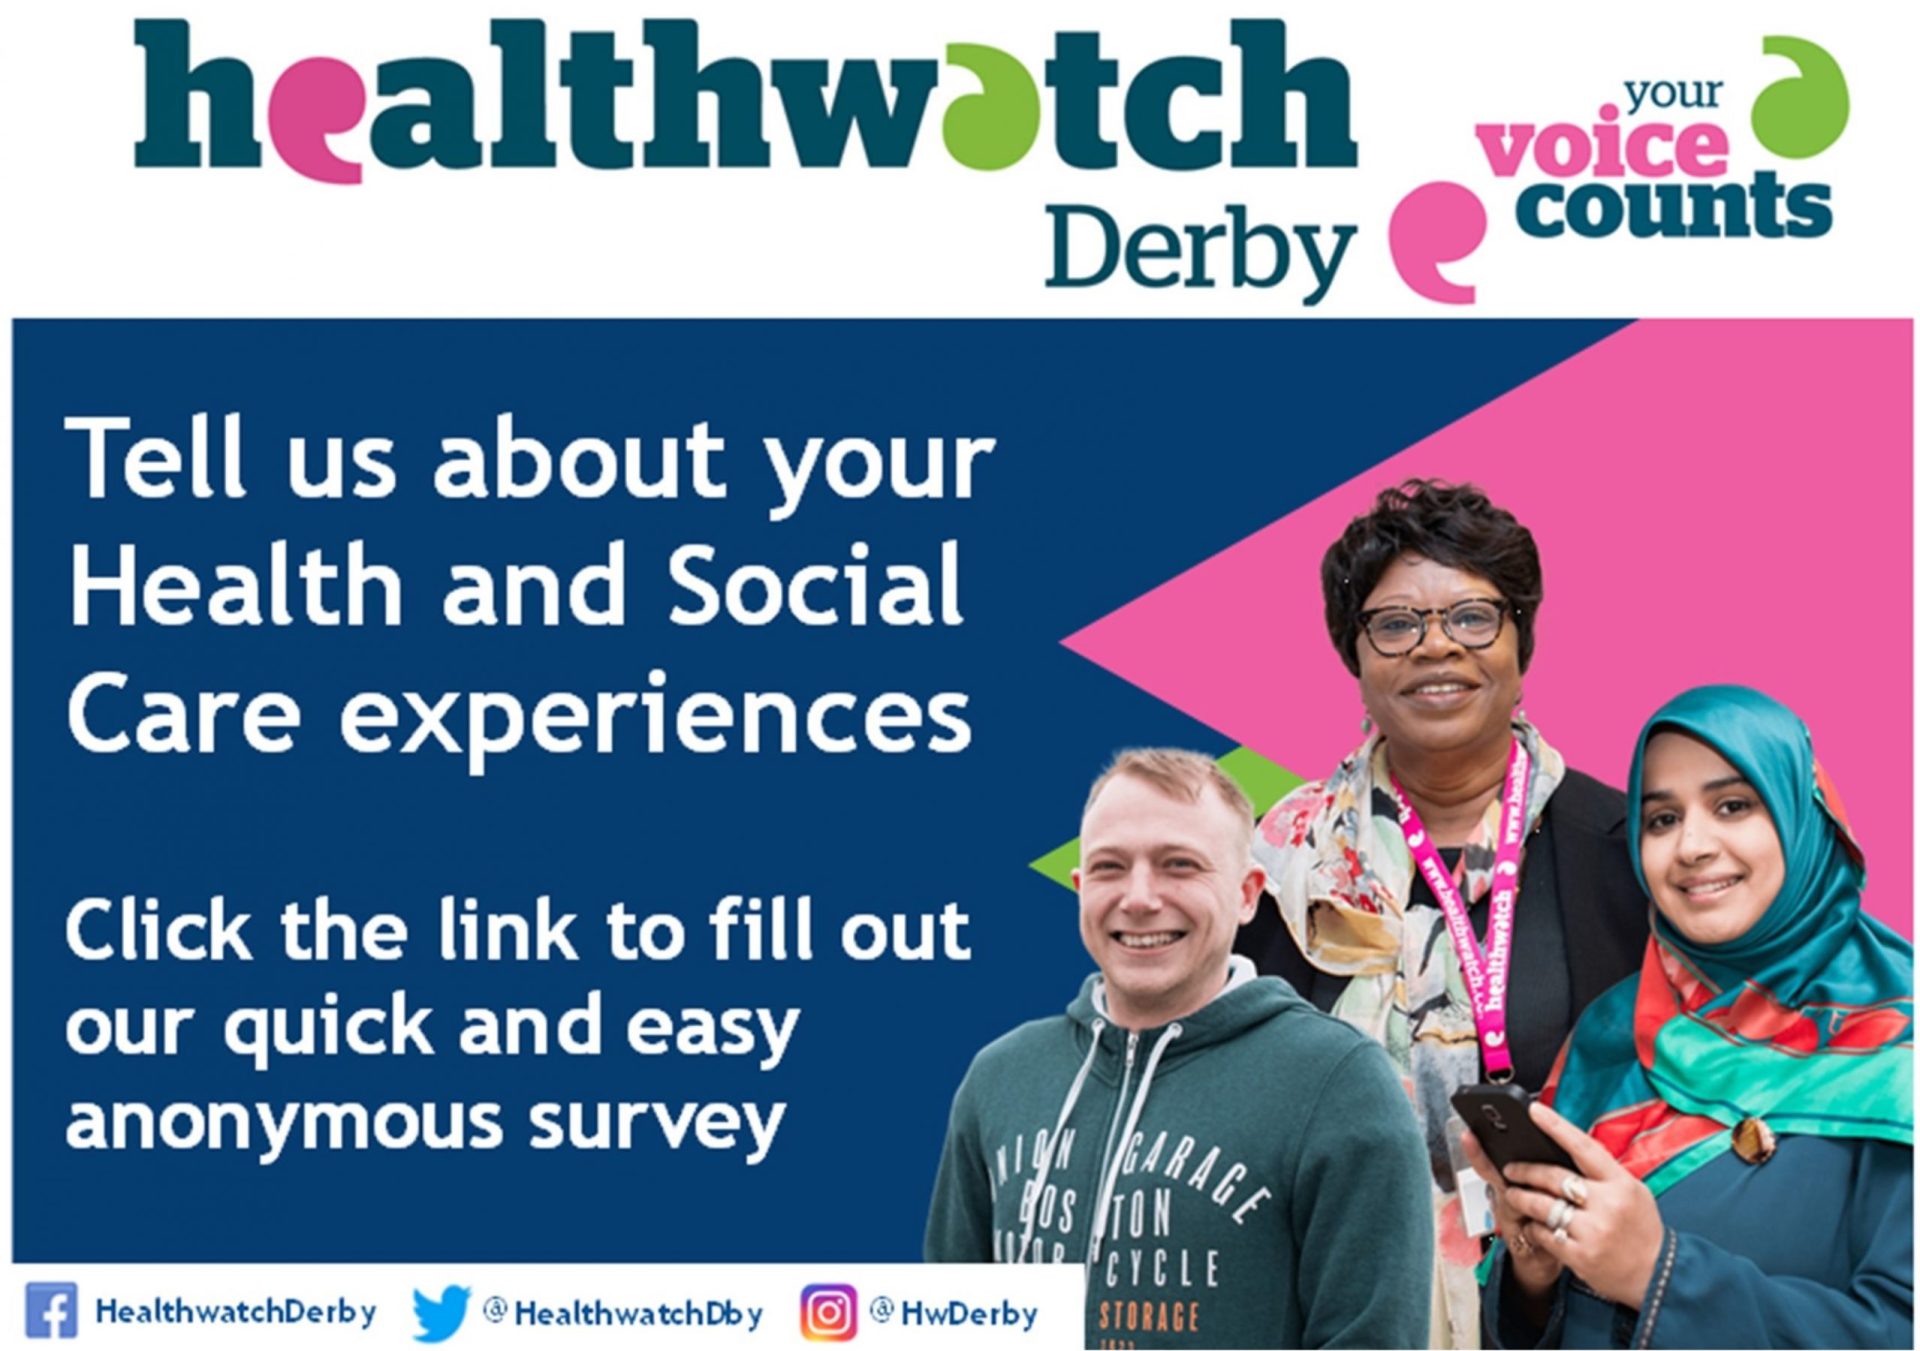 Tell us about your Health and Social Care experiences by filling in our survey.